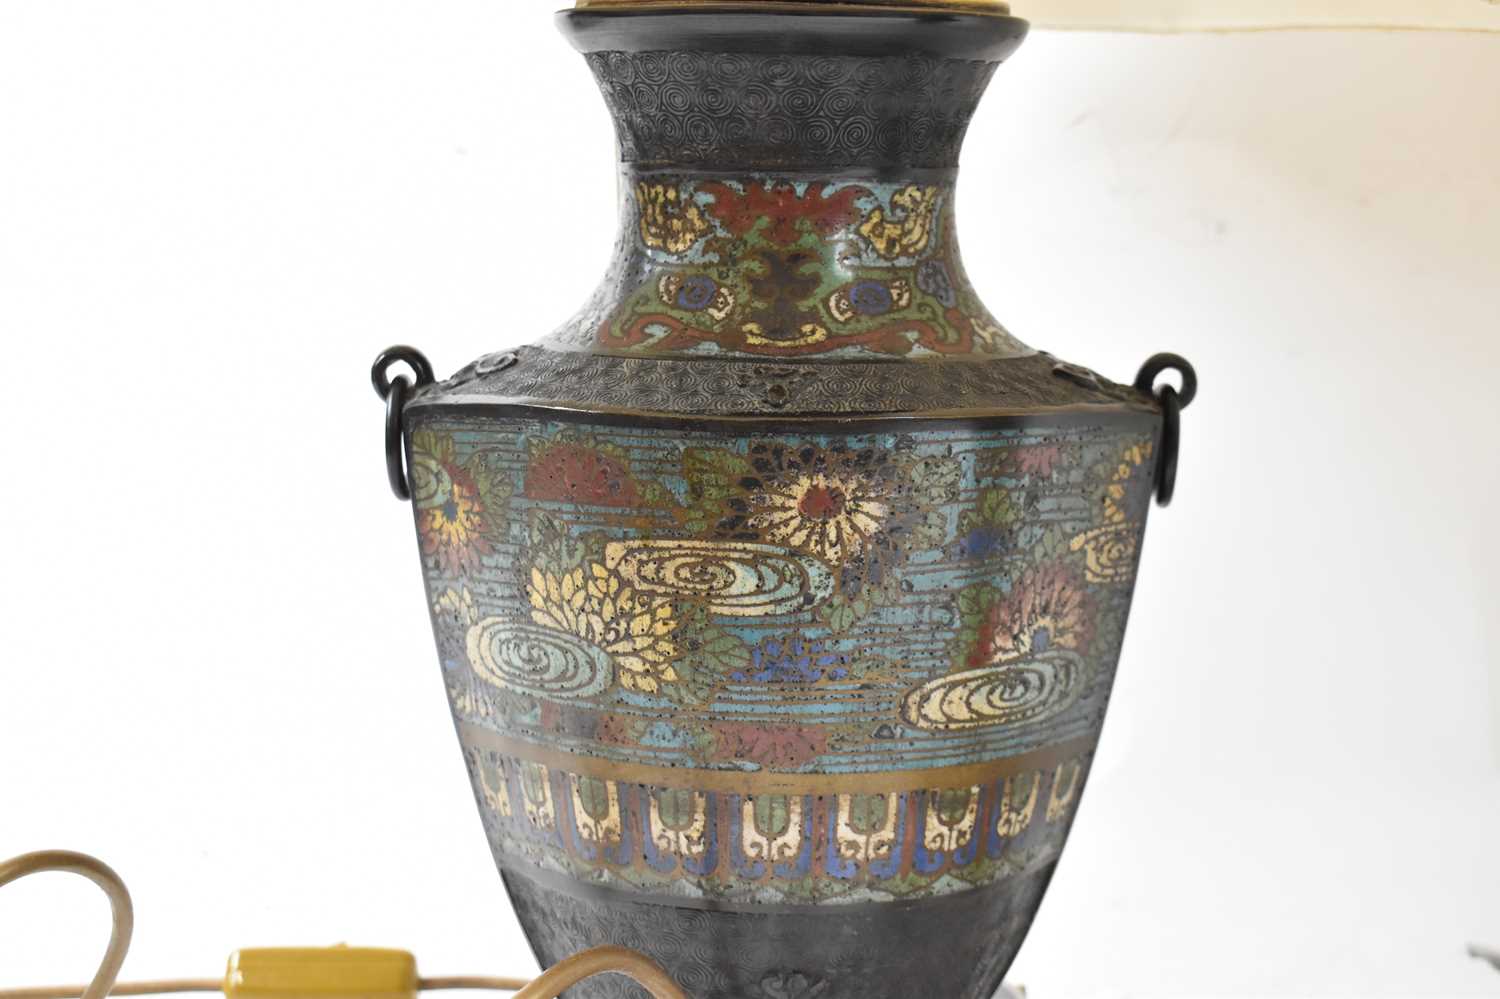 A pair of 19th century Japanese bronze and enamel temple jars converted to table lamps, height 33cm, - Image 2 of 3